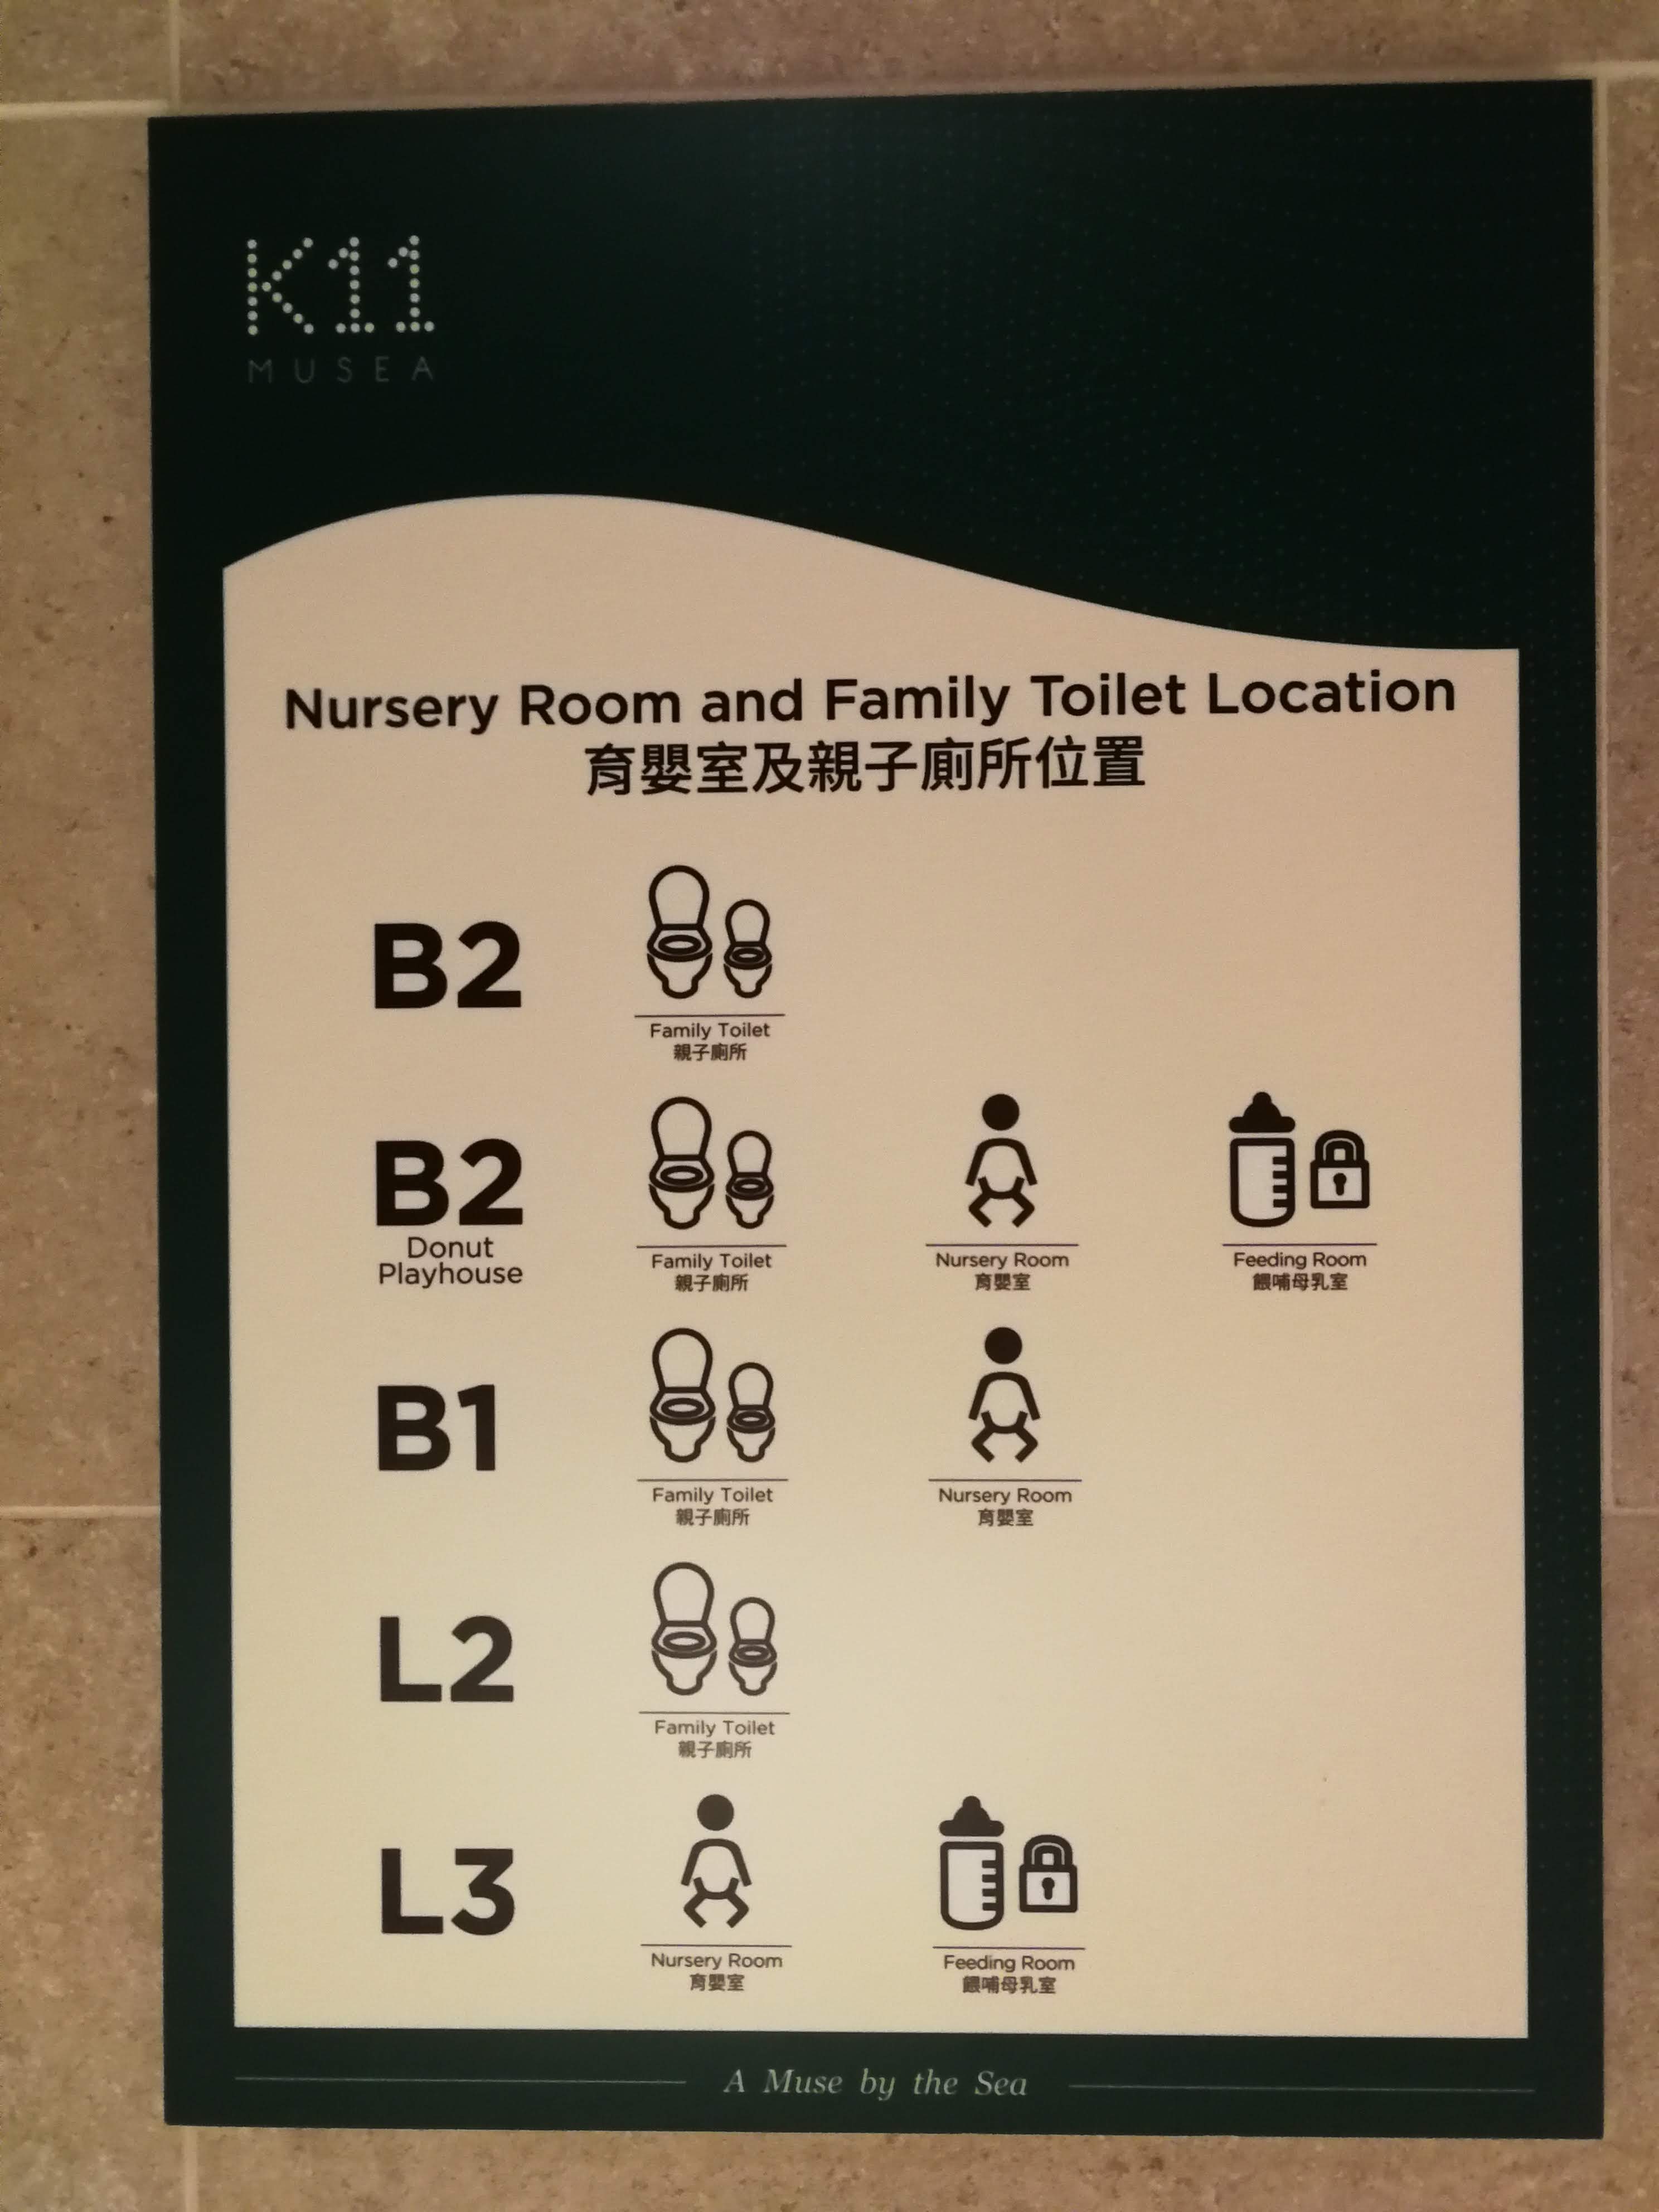 Sign for Nursing, Changing Room, and Family Restroom at K11 Musea